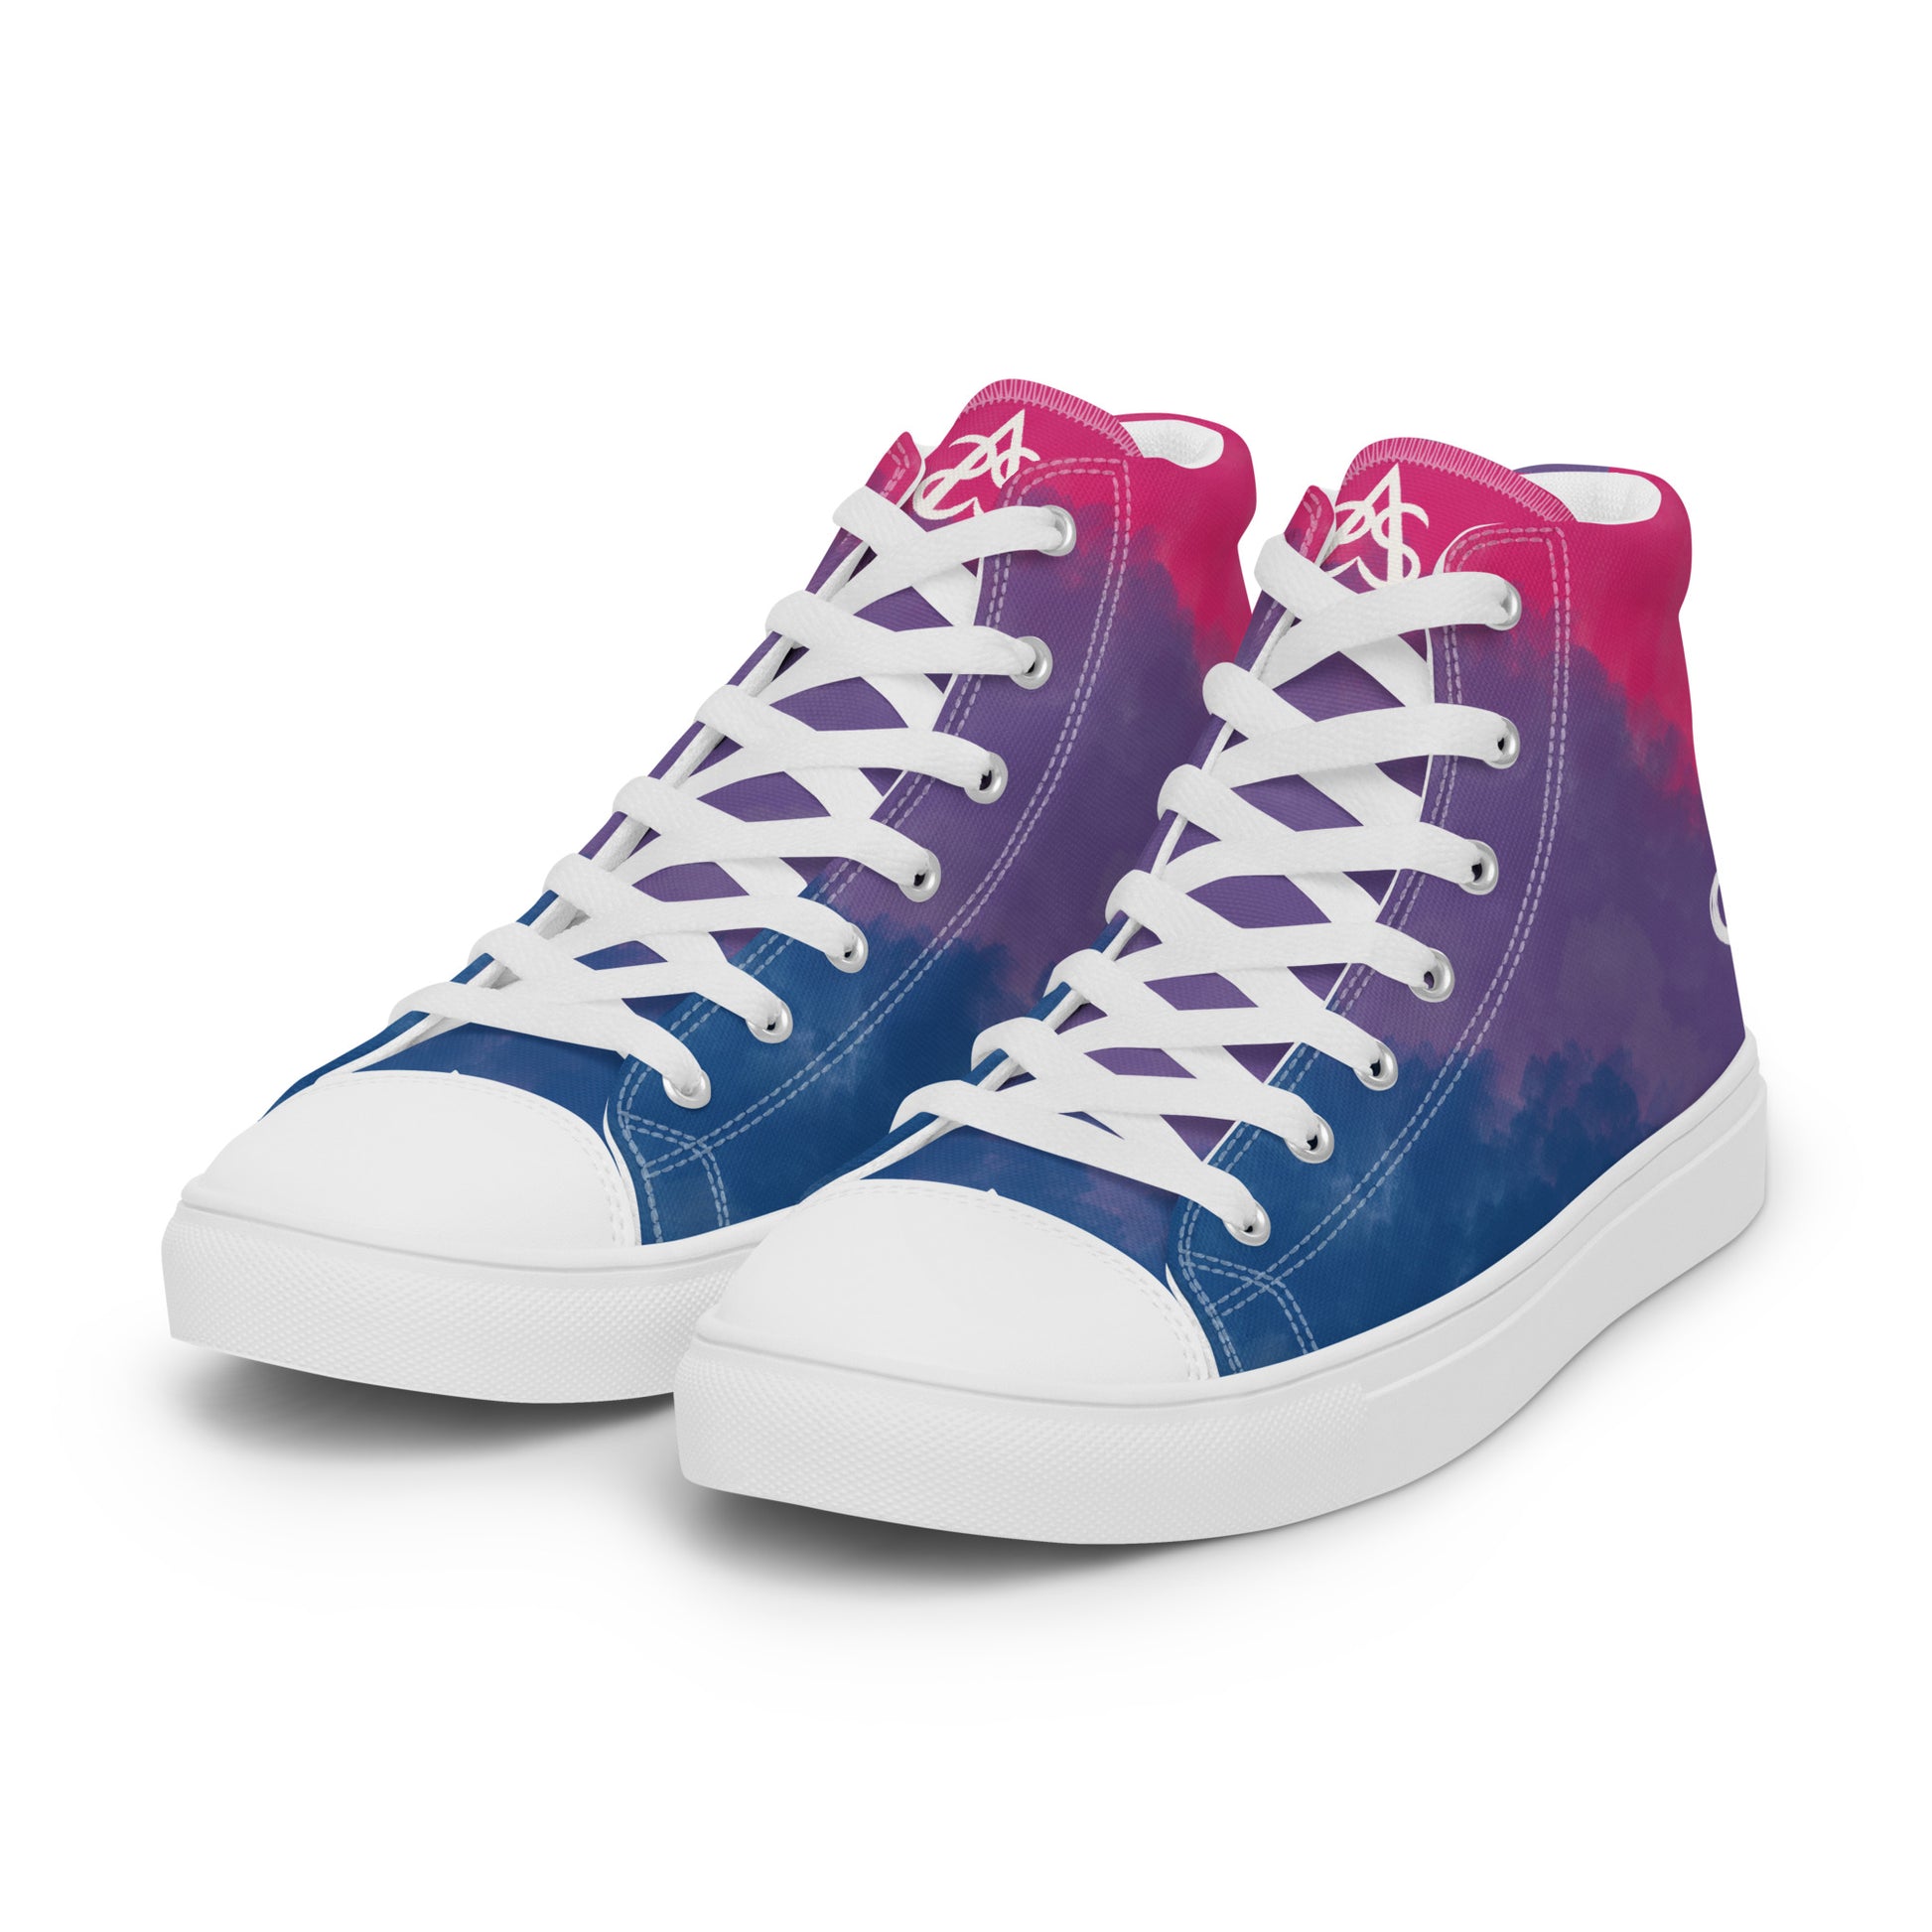 Left front view: a pair of high top shoes with color block pink, purple, and blue clouds, a white hand drawn heart, and the Aras Sivad logo on the back.